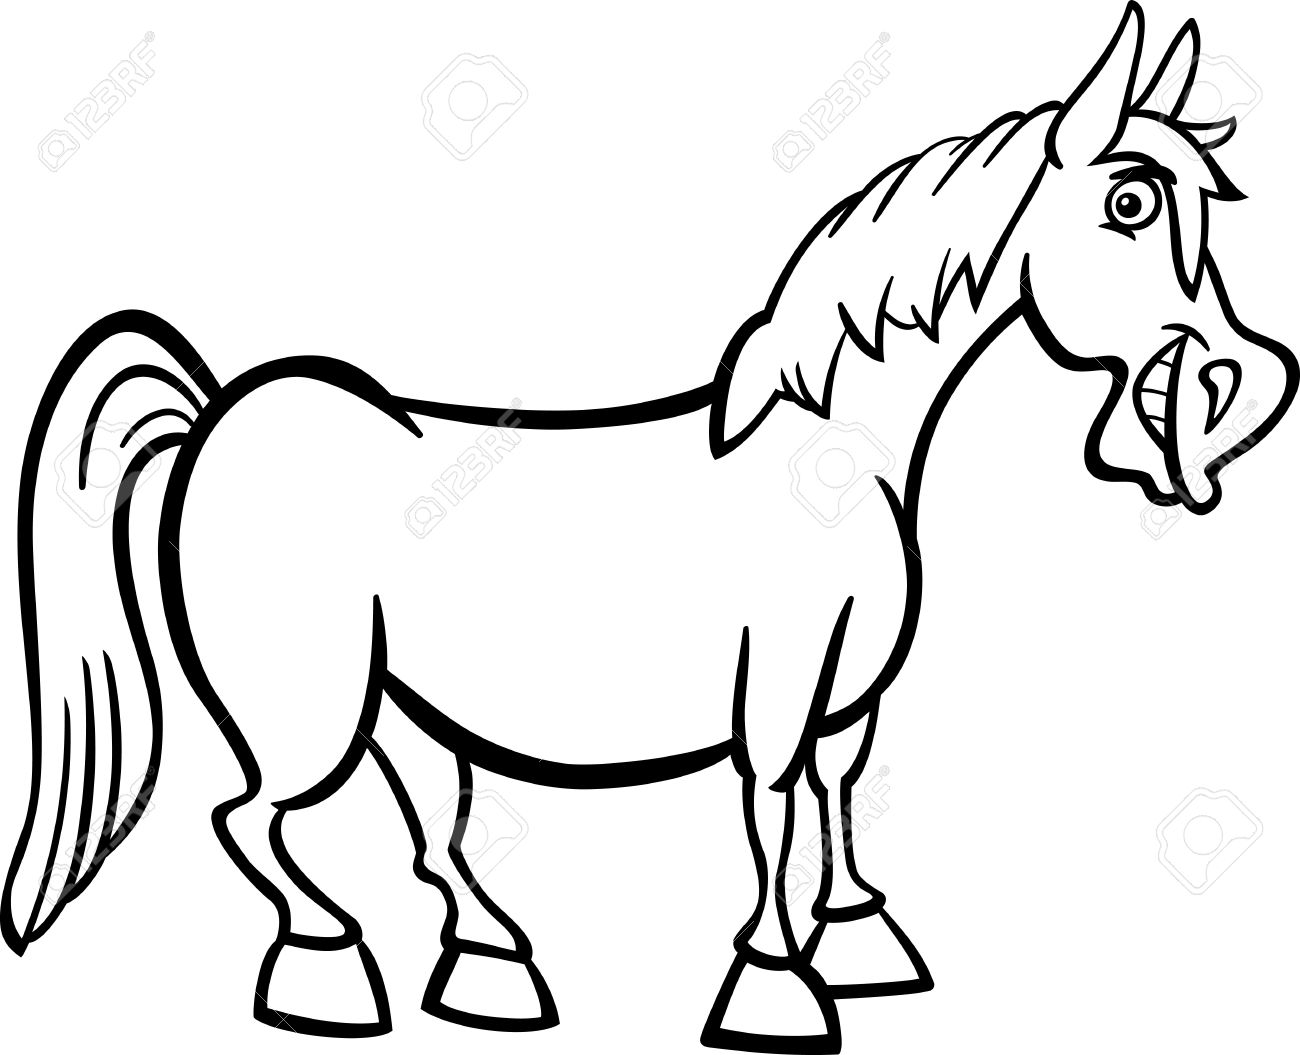 Horse clipart black and white 3 » Clipart Station.